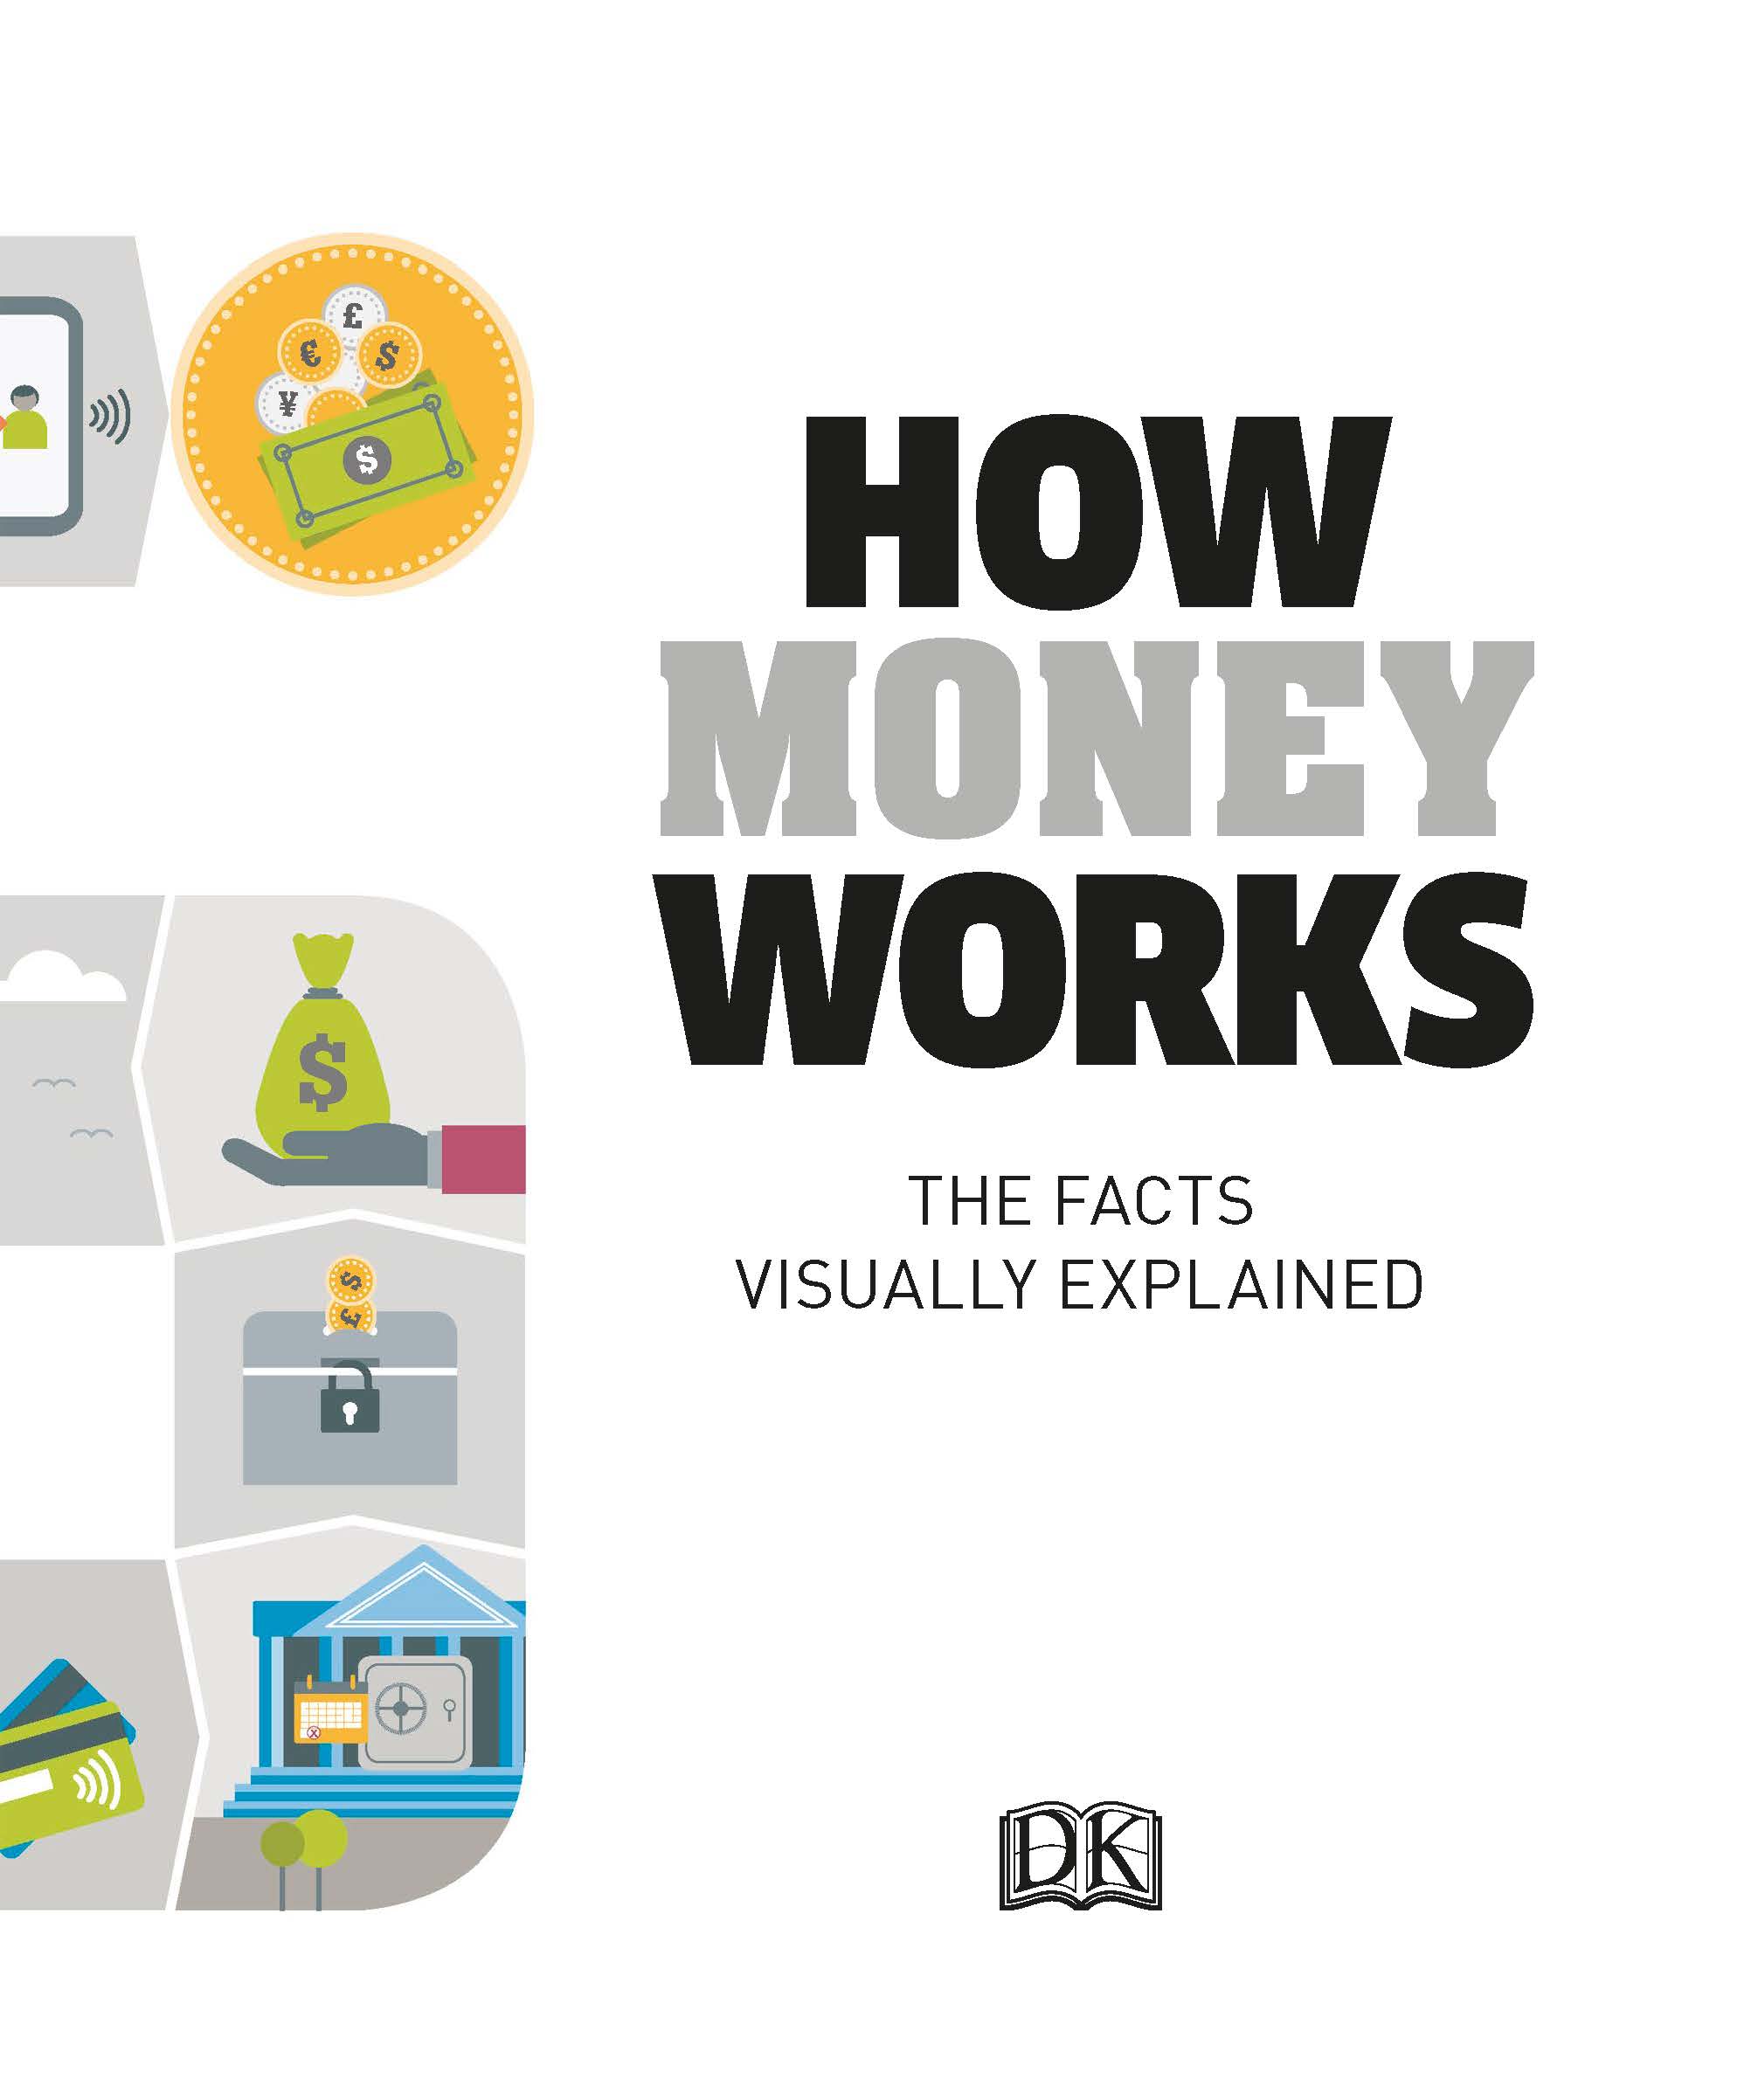 How-Money-Works-DK_页面_005